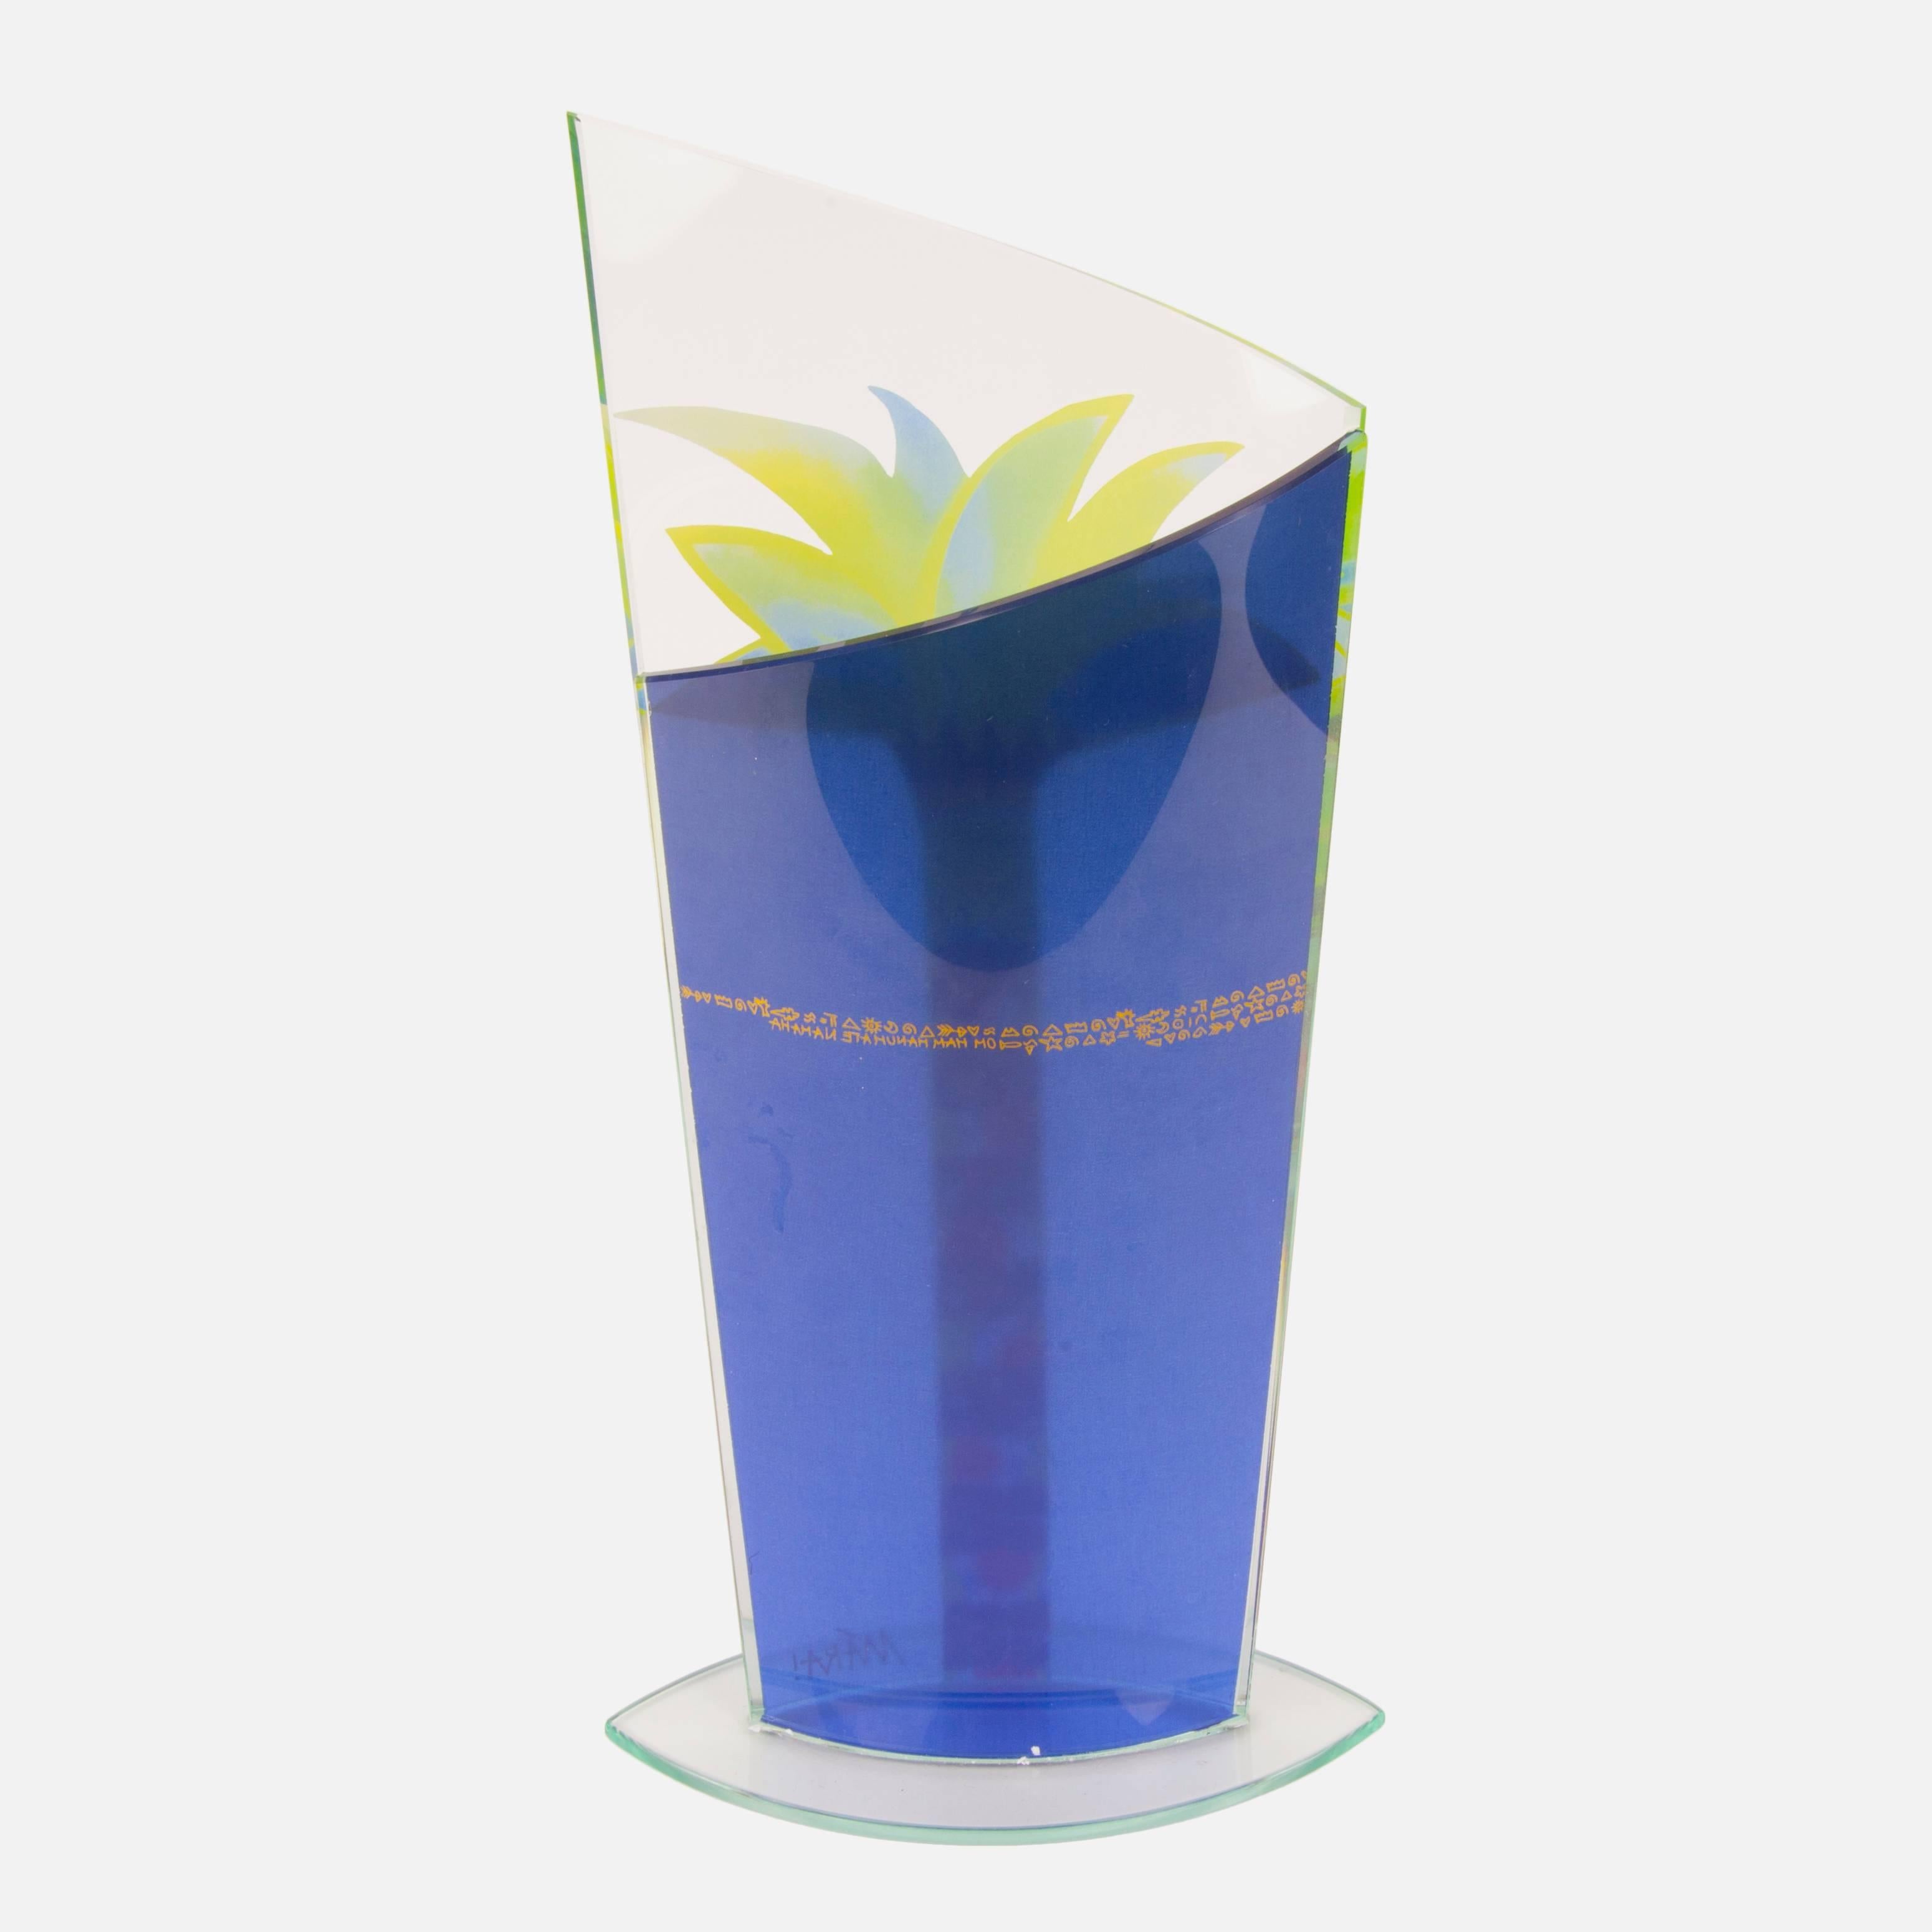 Beautifully decorated glass Handkerchief vase featuring a hand-painted palm tree design and hieroglyphics on the back; measure: 12.5” high x 6” wide x .5” deep.